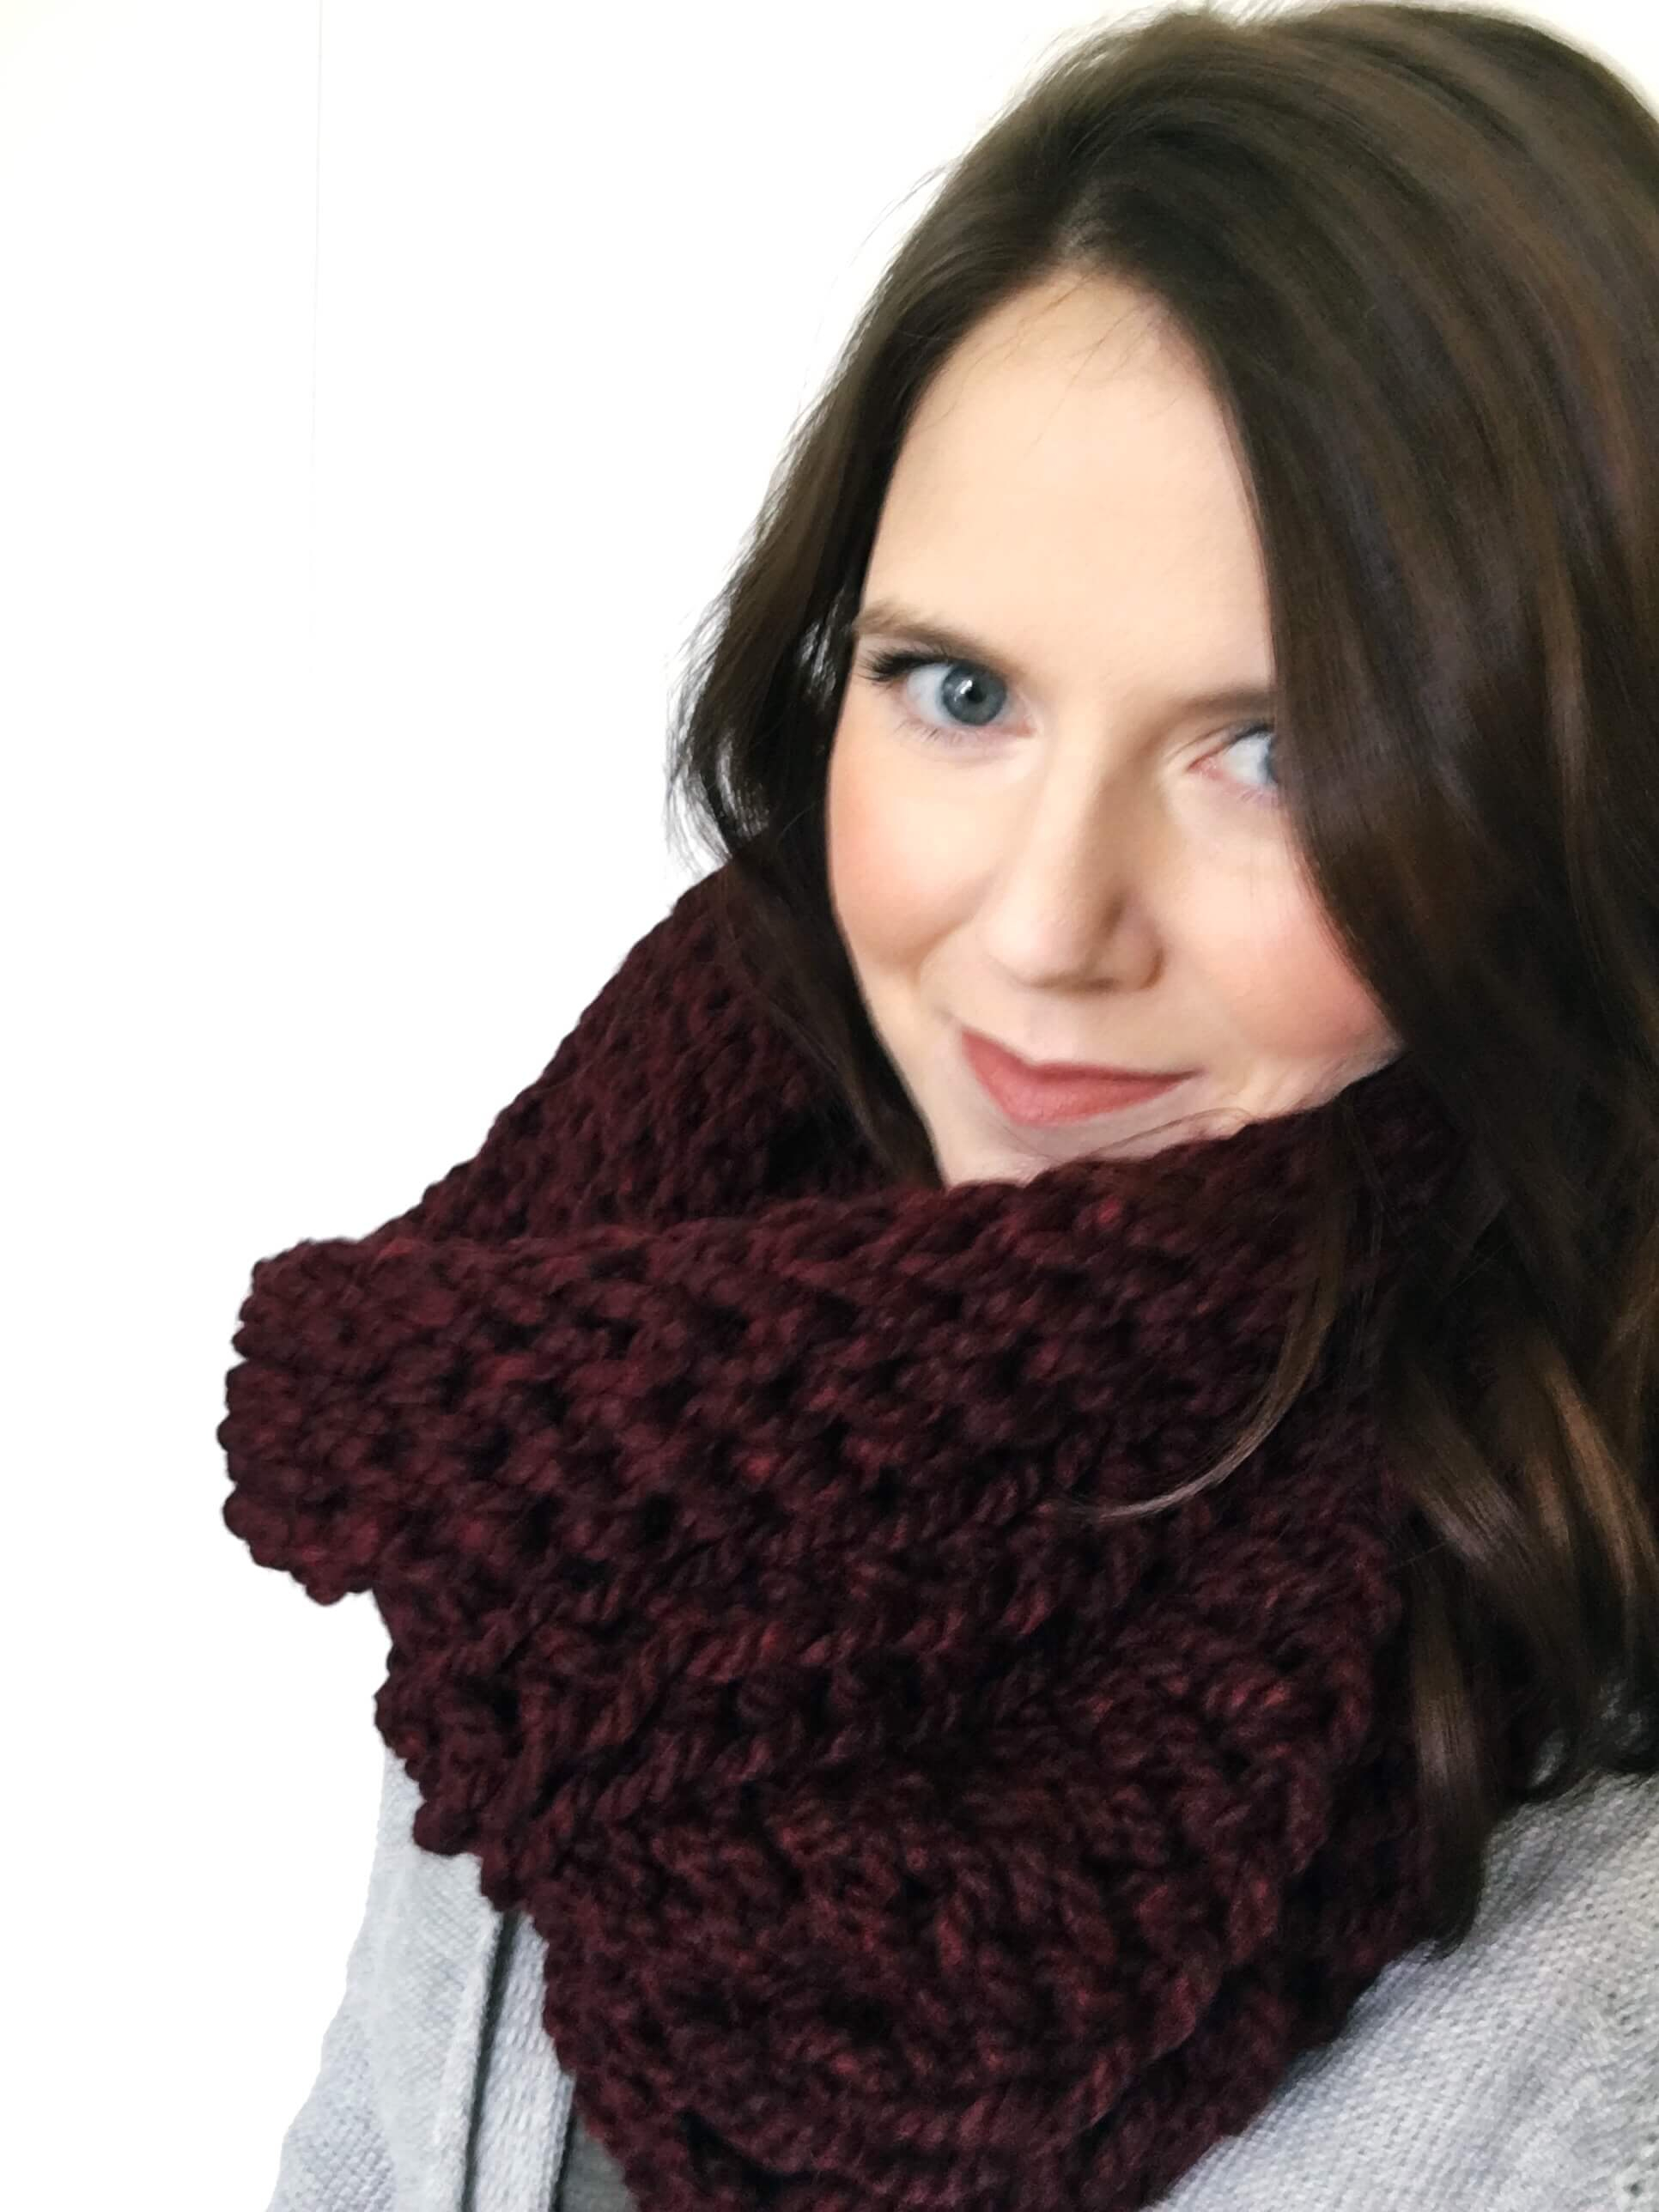 Chunky Crochet Scarf Pattern How To Make A Chunky Crochet Scarf That Will Lay Perfect Every Time